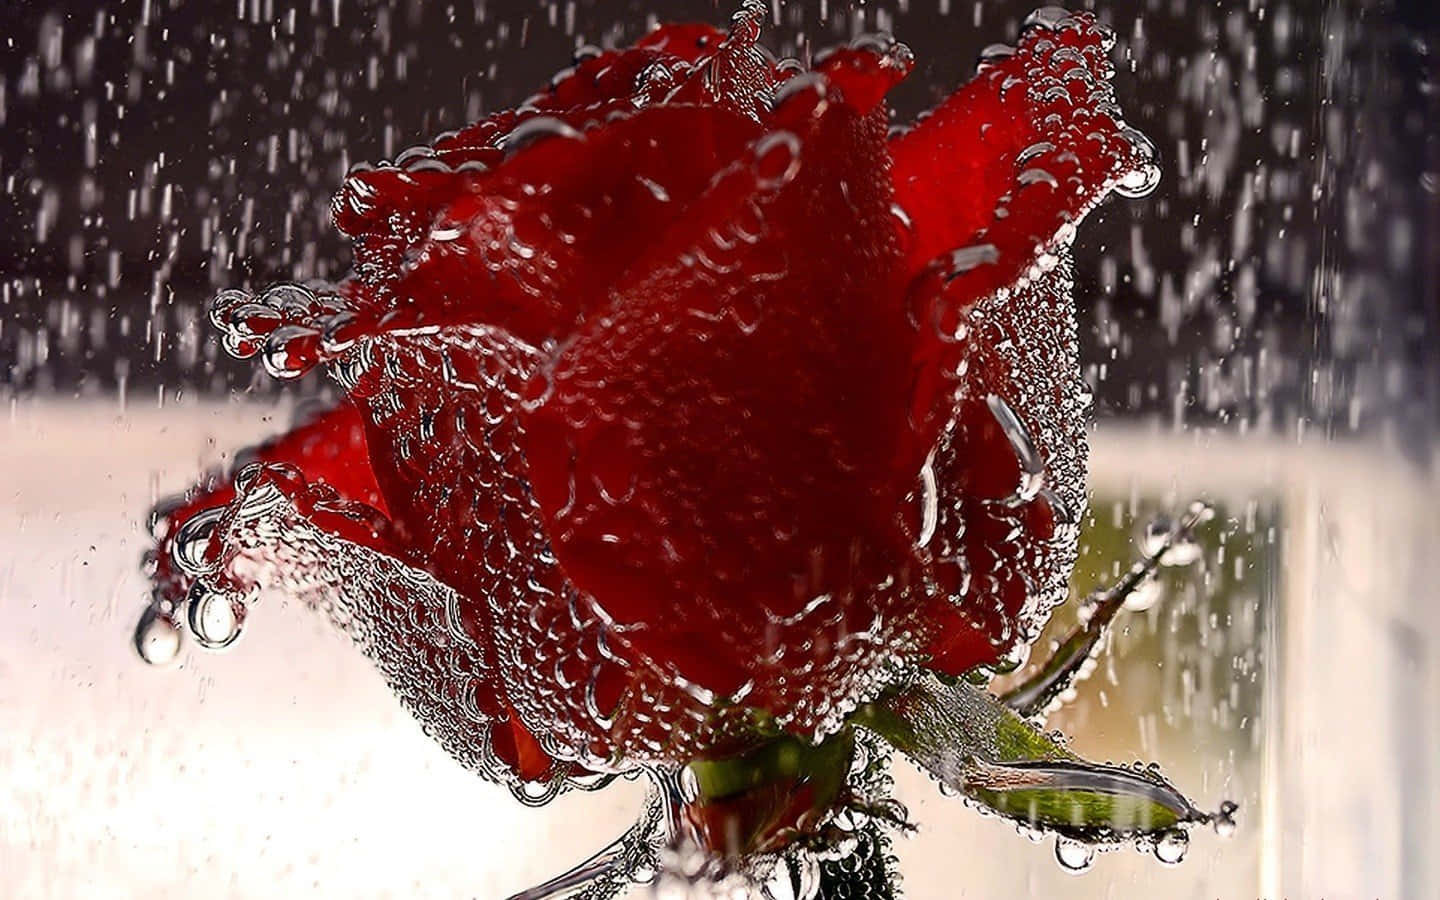 A vibrant rose drenched in raindrops Wallpaper